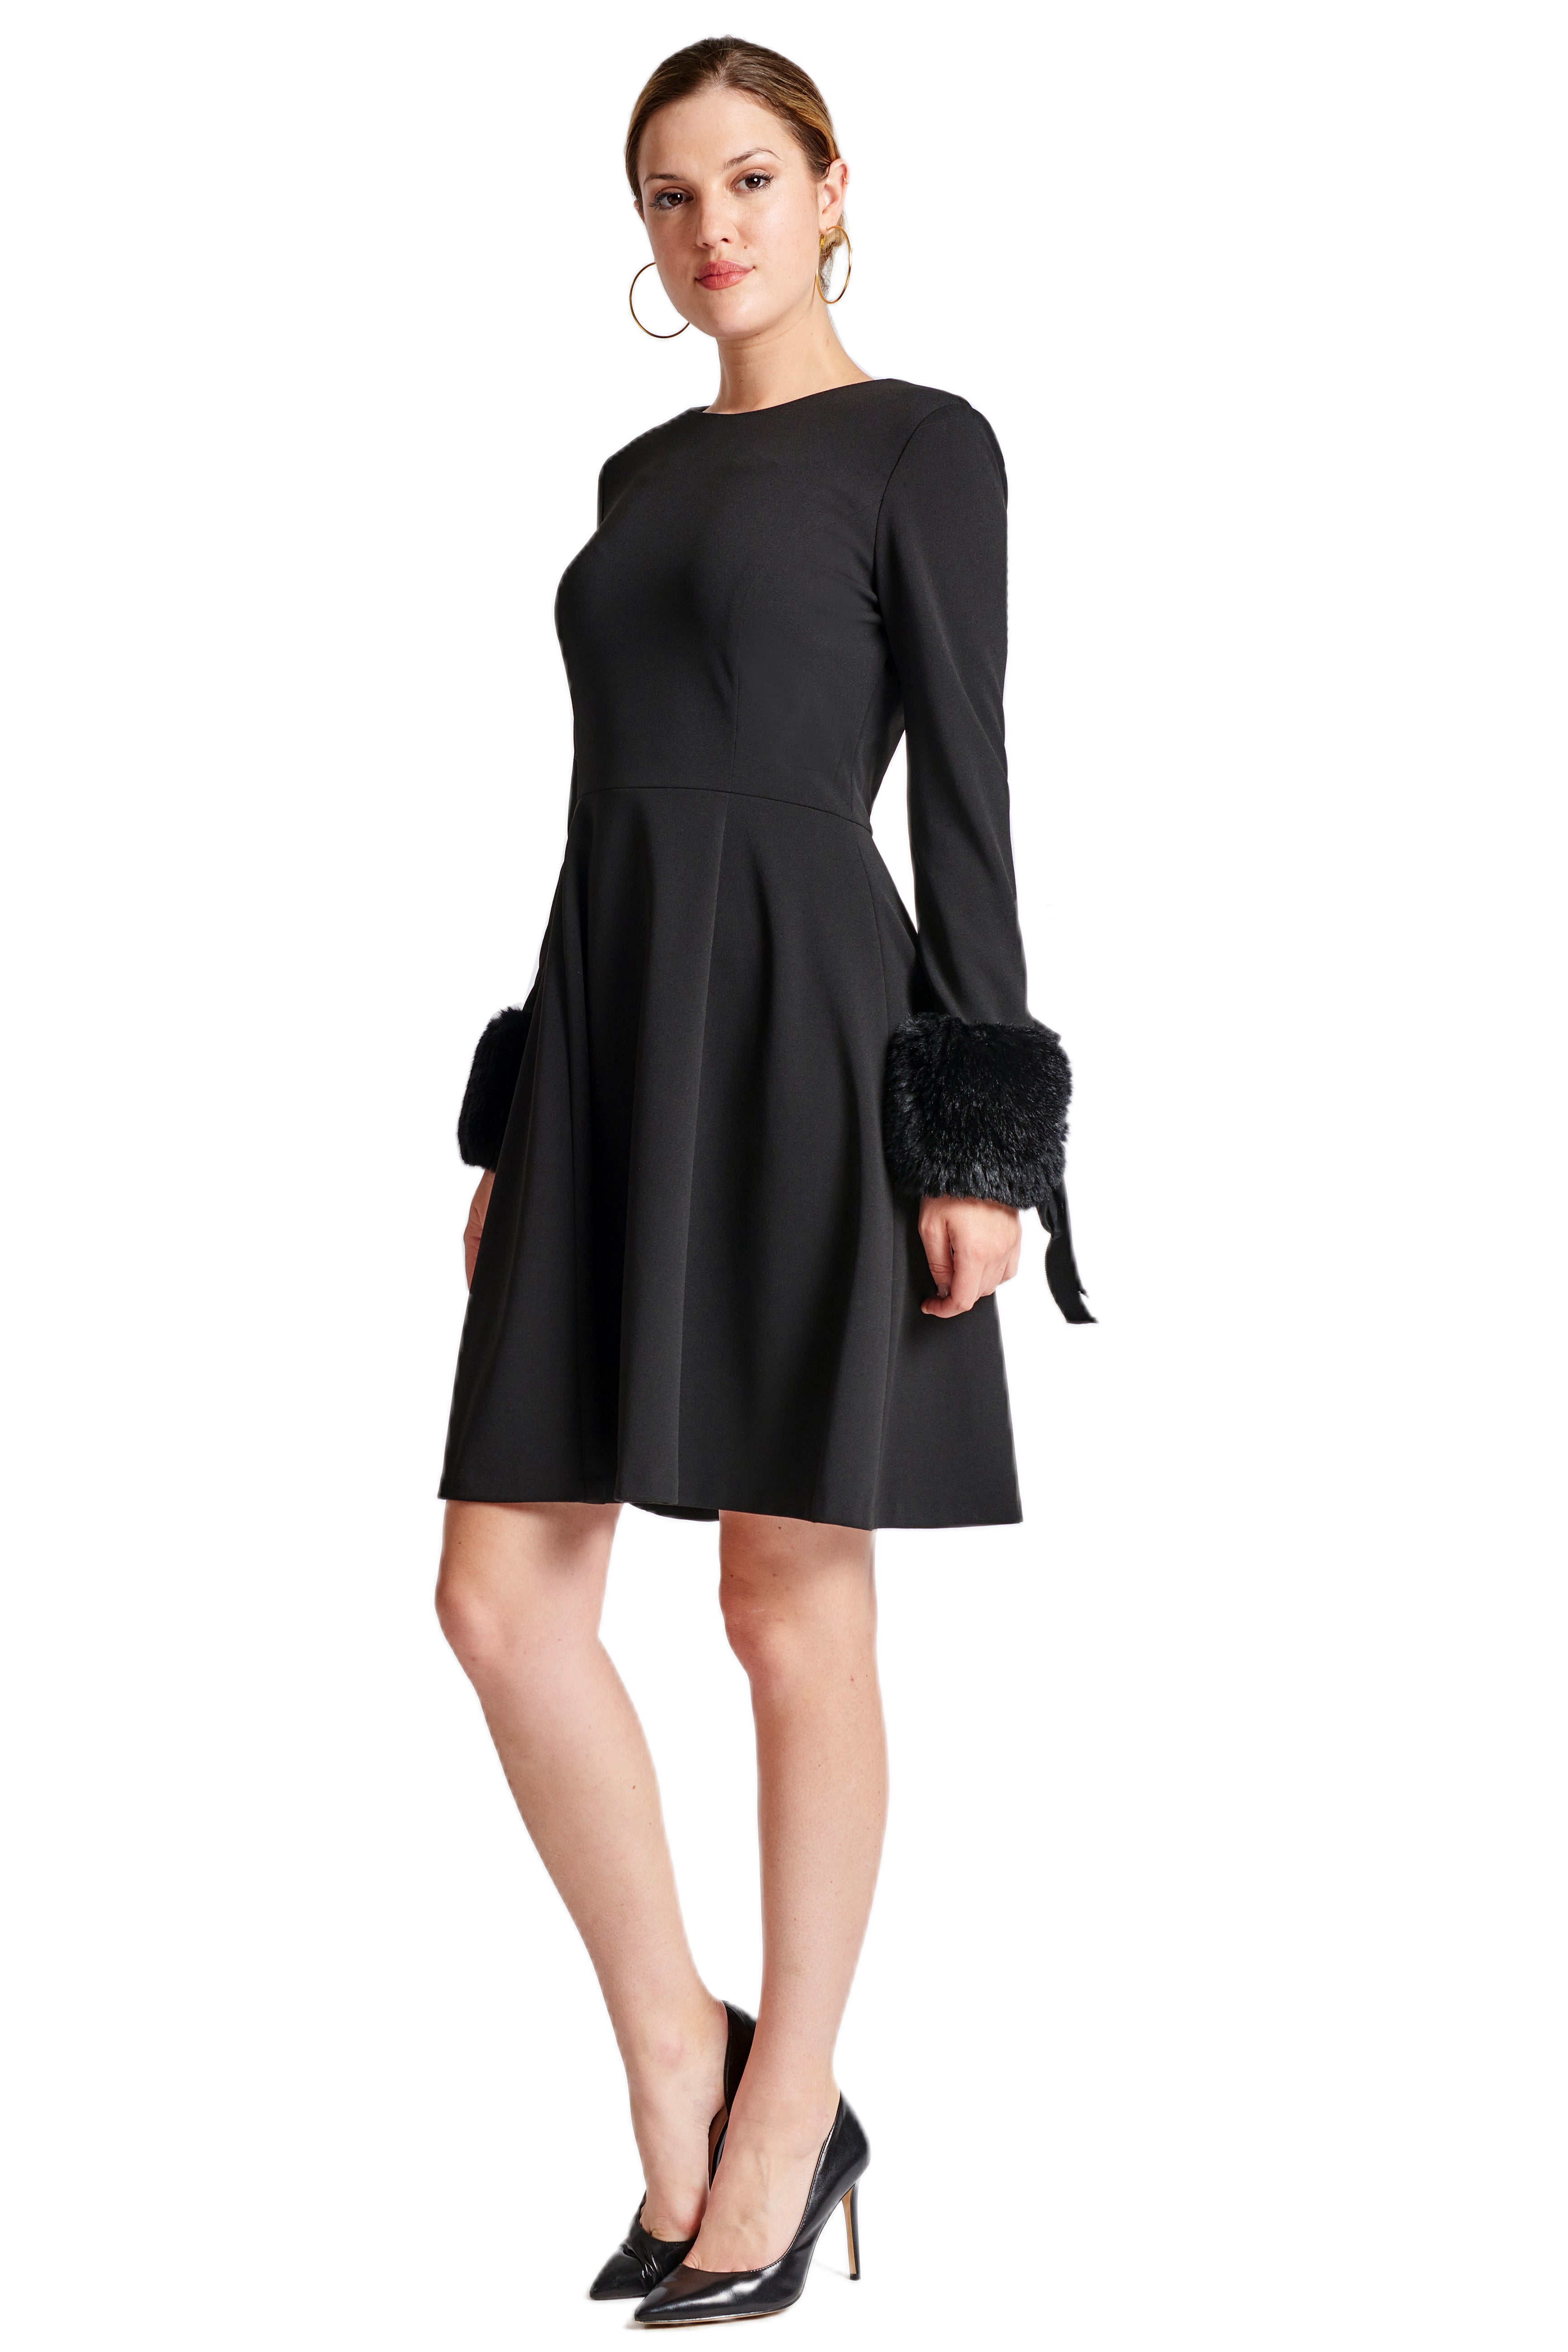 Model wearing fit & flare black poly crepe long sleeve dress with sweetheart neckline & faux fur cuffs.